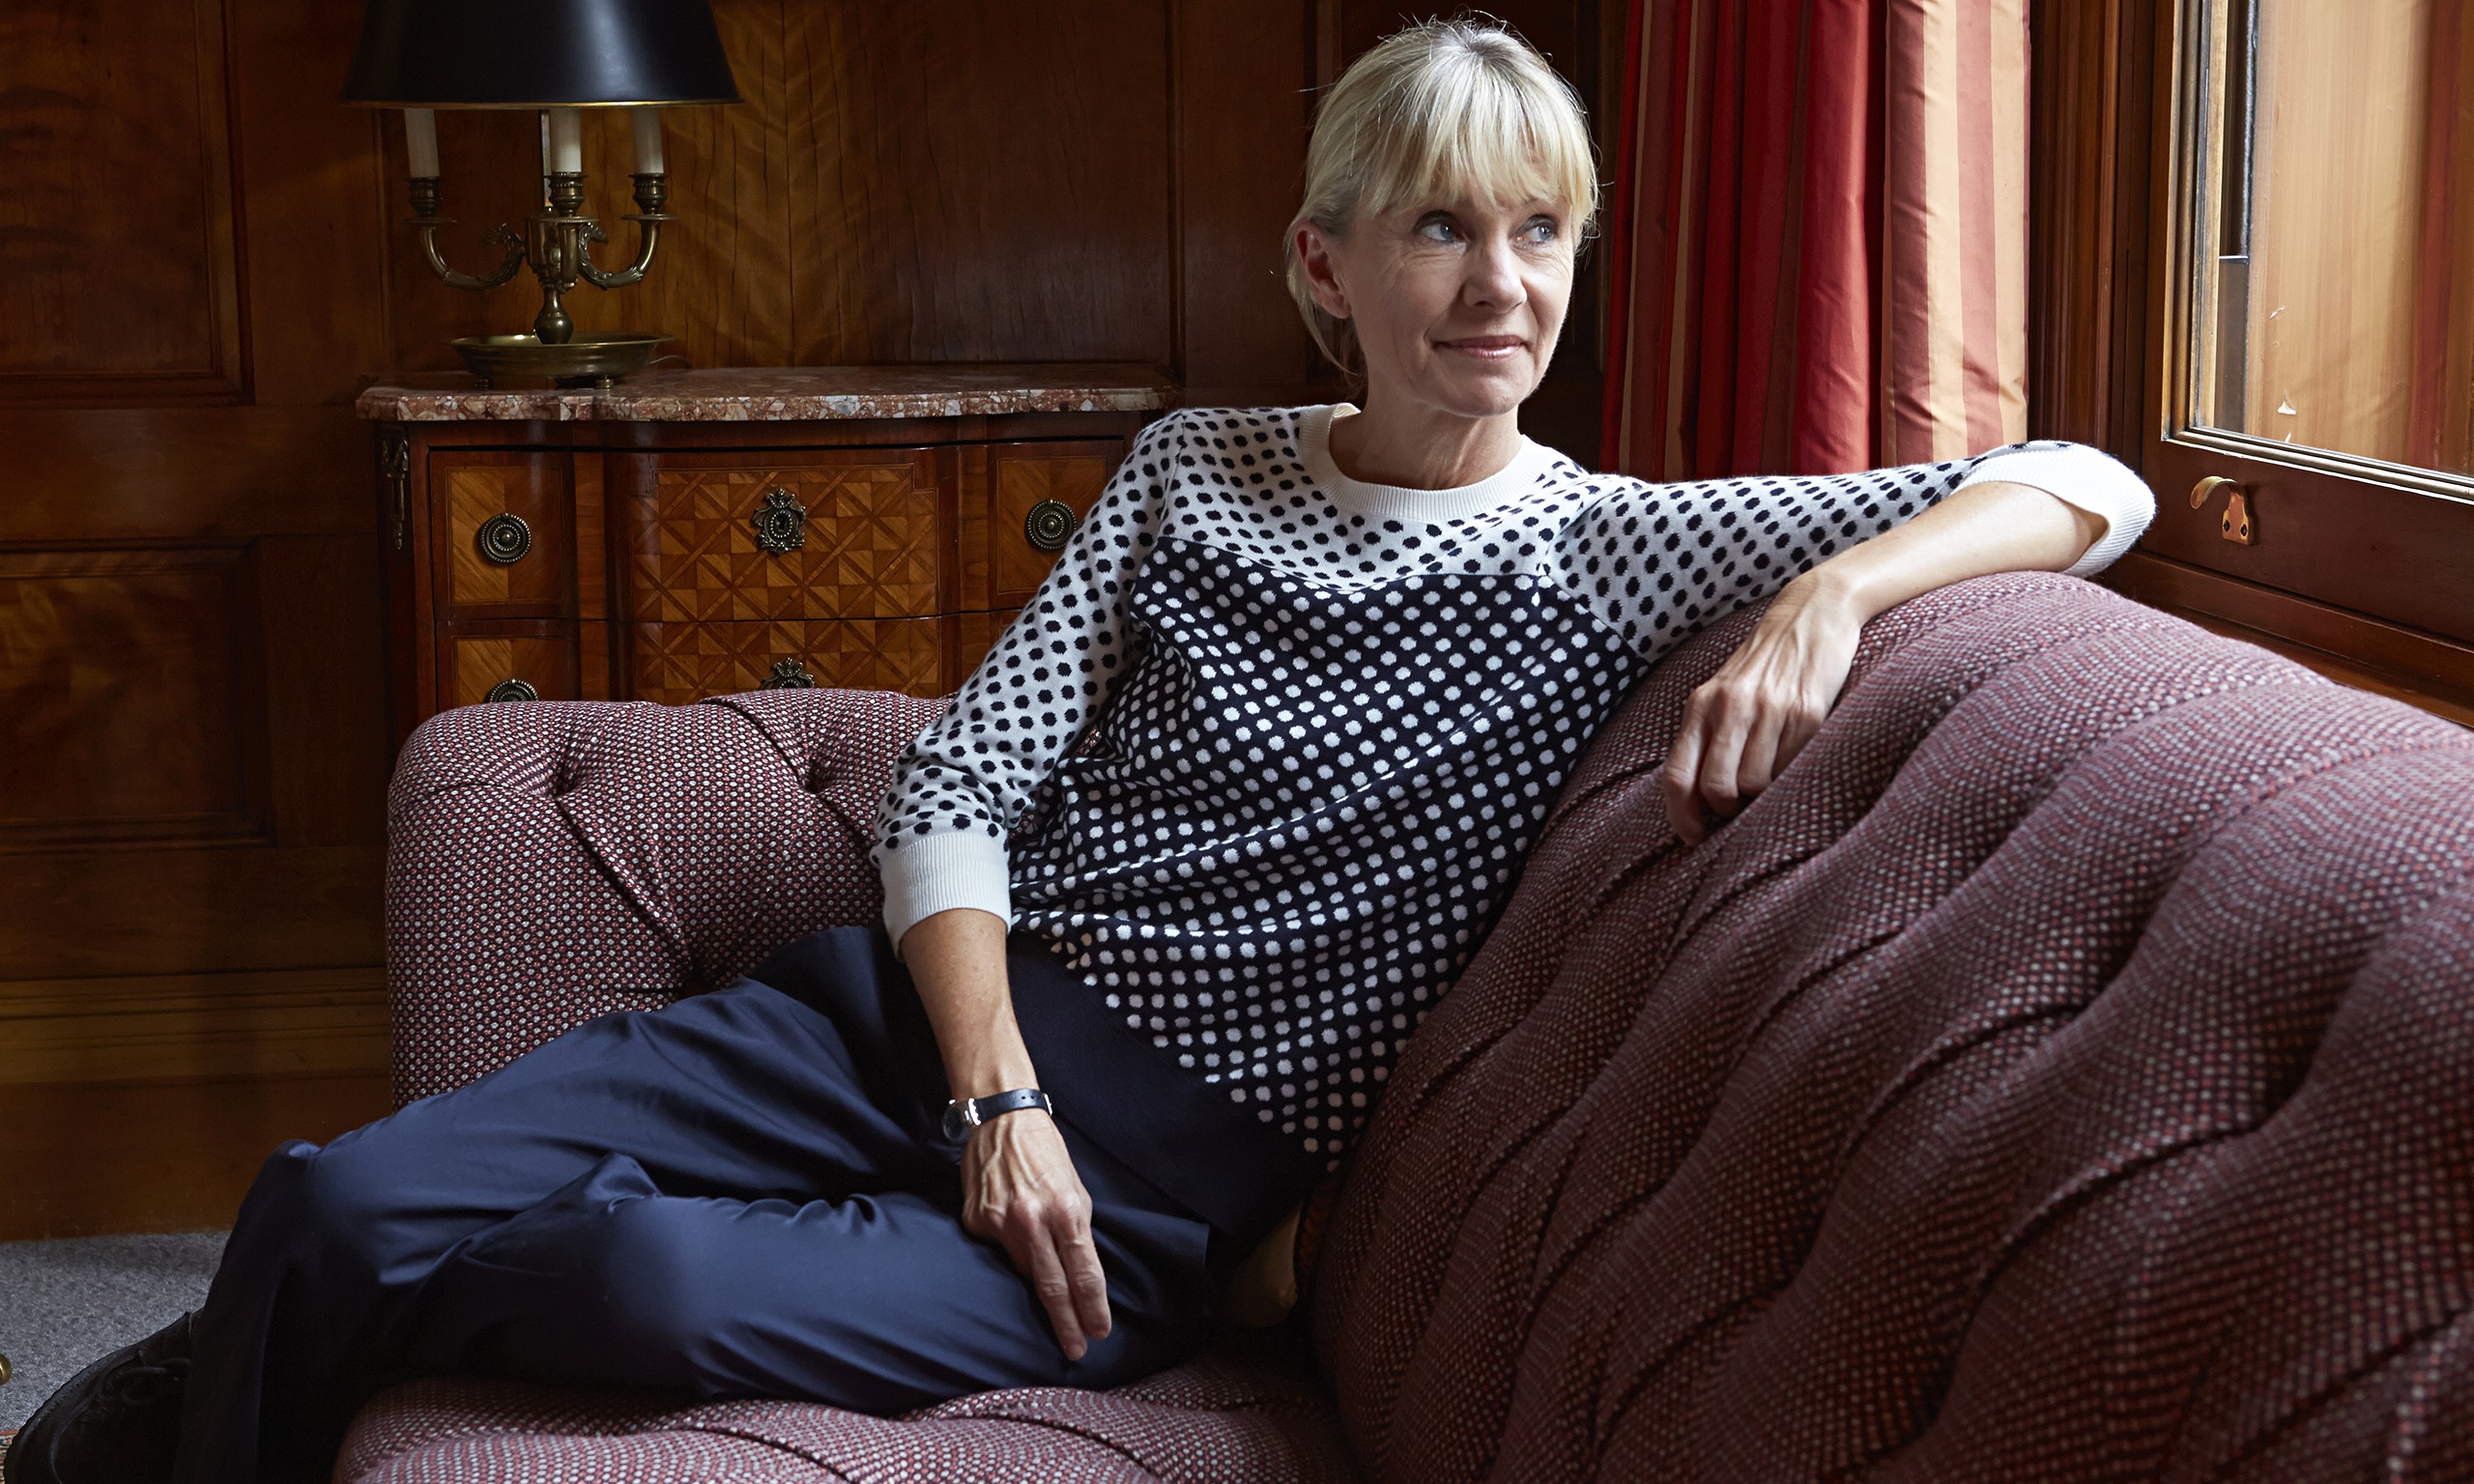 Kate Mosse: my skill is storytelling, not literary fiction | Books